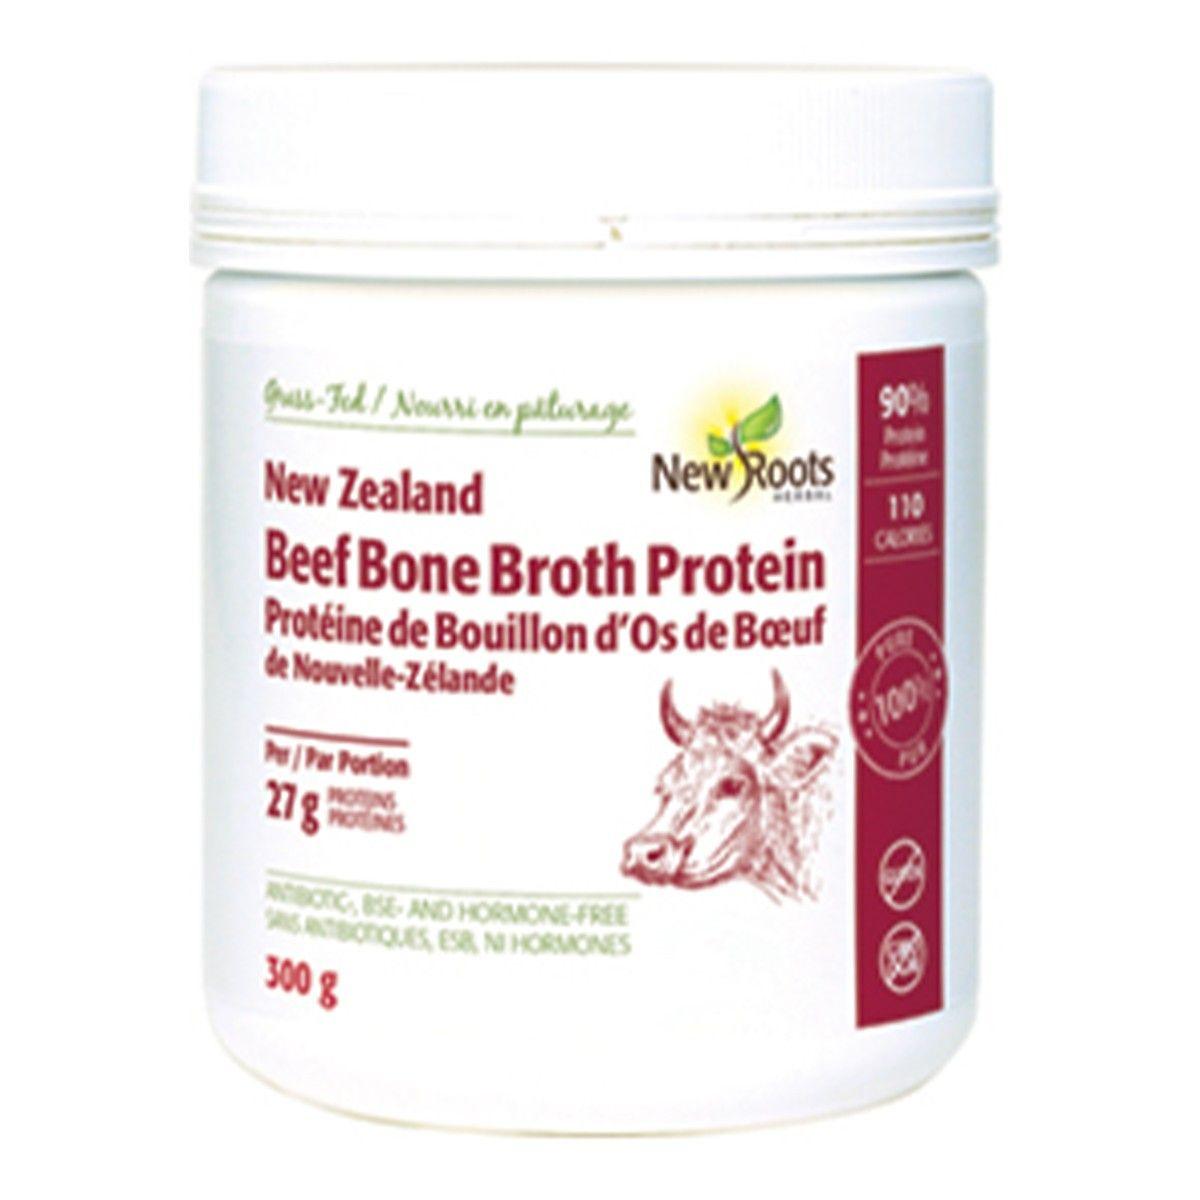 New Roots New Zealand Beef Bone Broth Protein 300g Supplements - Protein at Village Vitamin Store